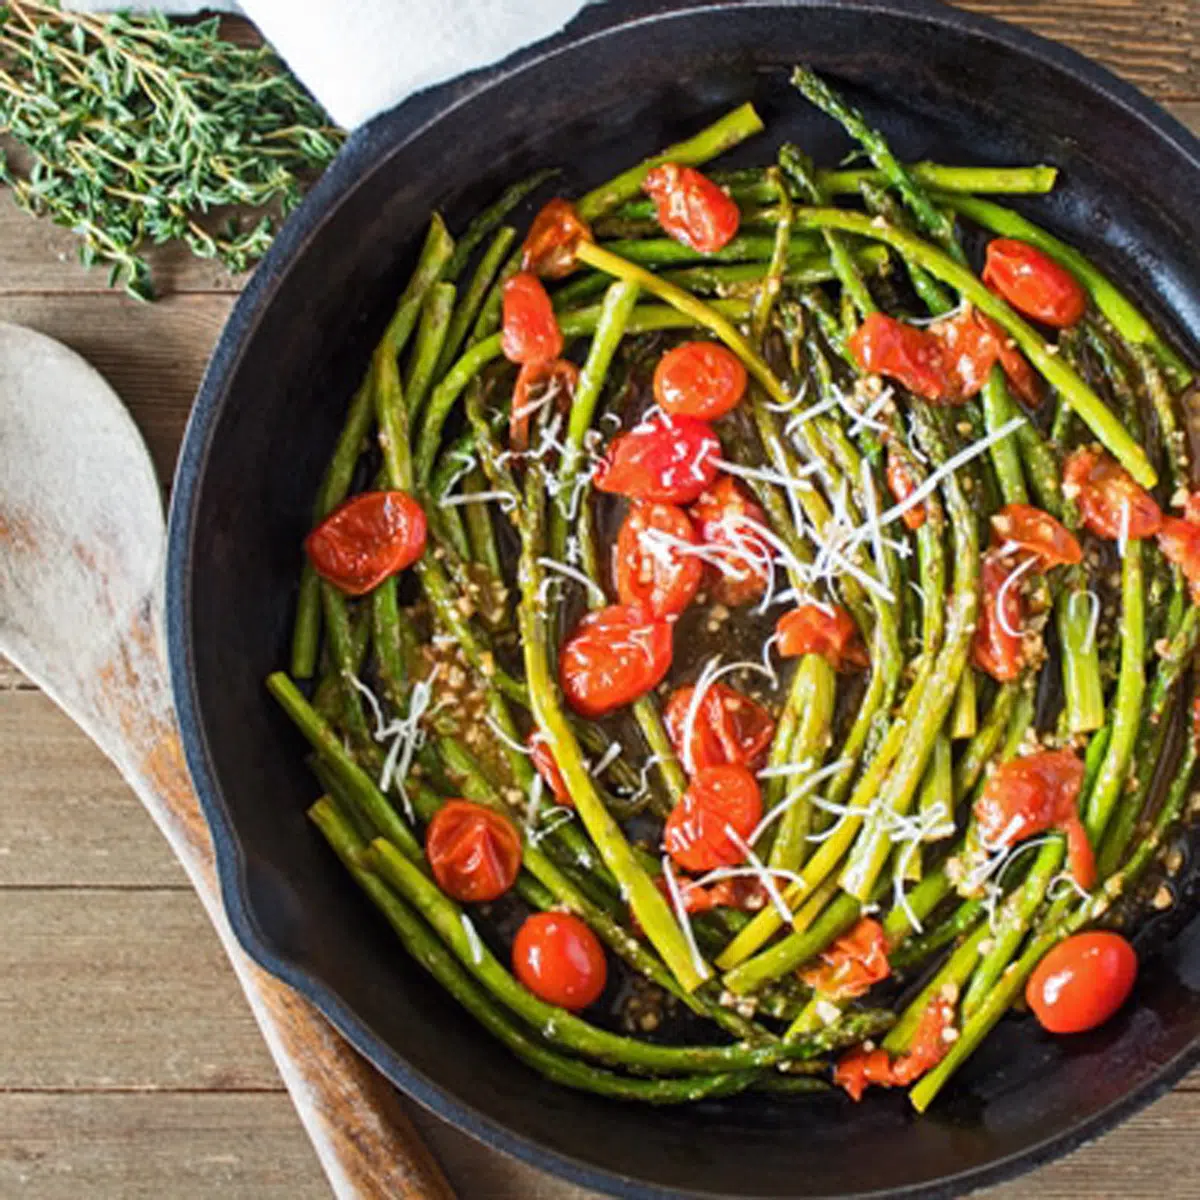 How to cook asparagus like this sauteed asparagus with cherry tomatoes.